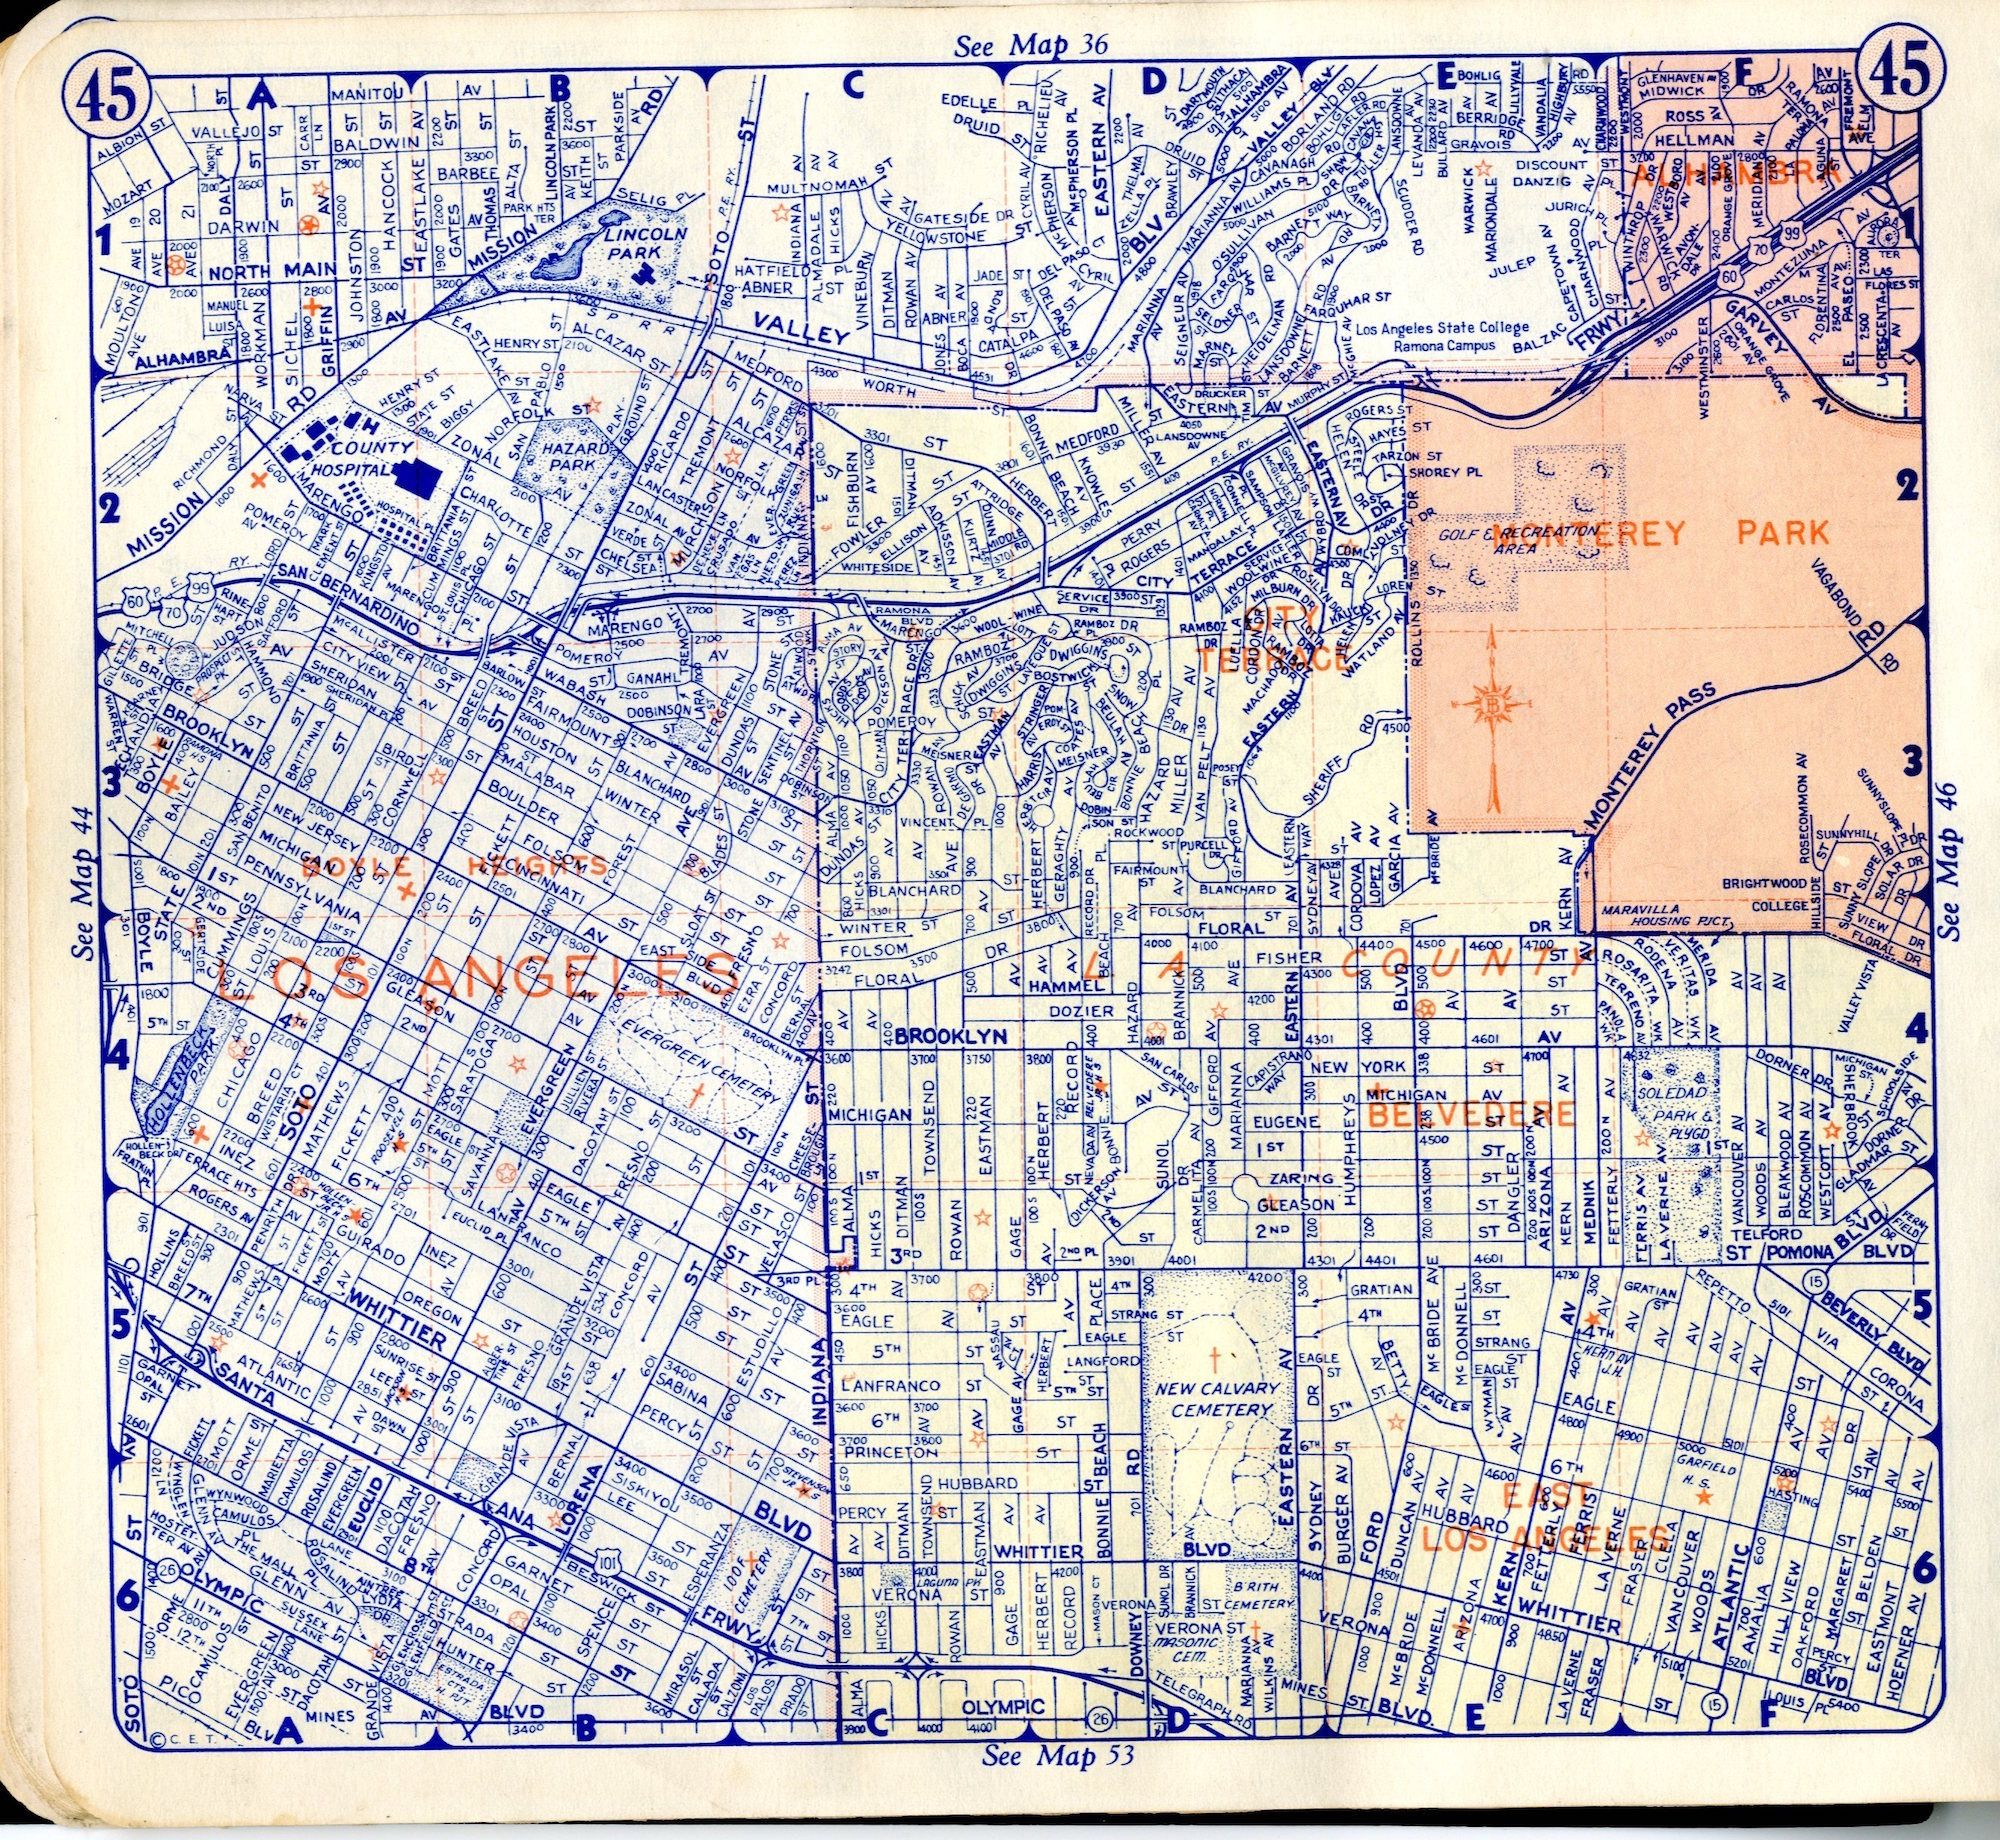 Boyle Heights - Here Is A Simple Street Map, Taken From A 1950 - Thomas Bros Maps California